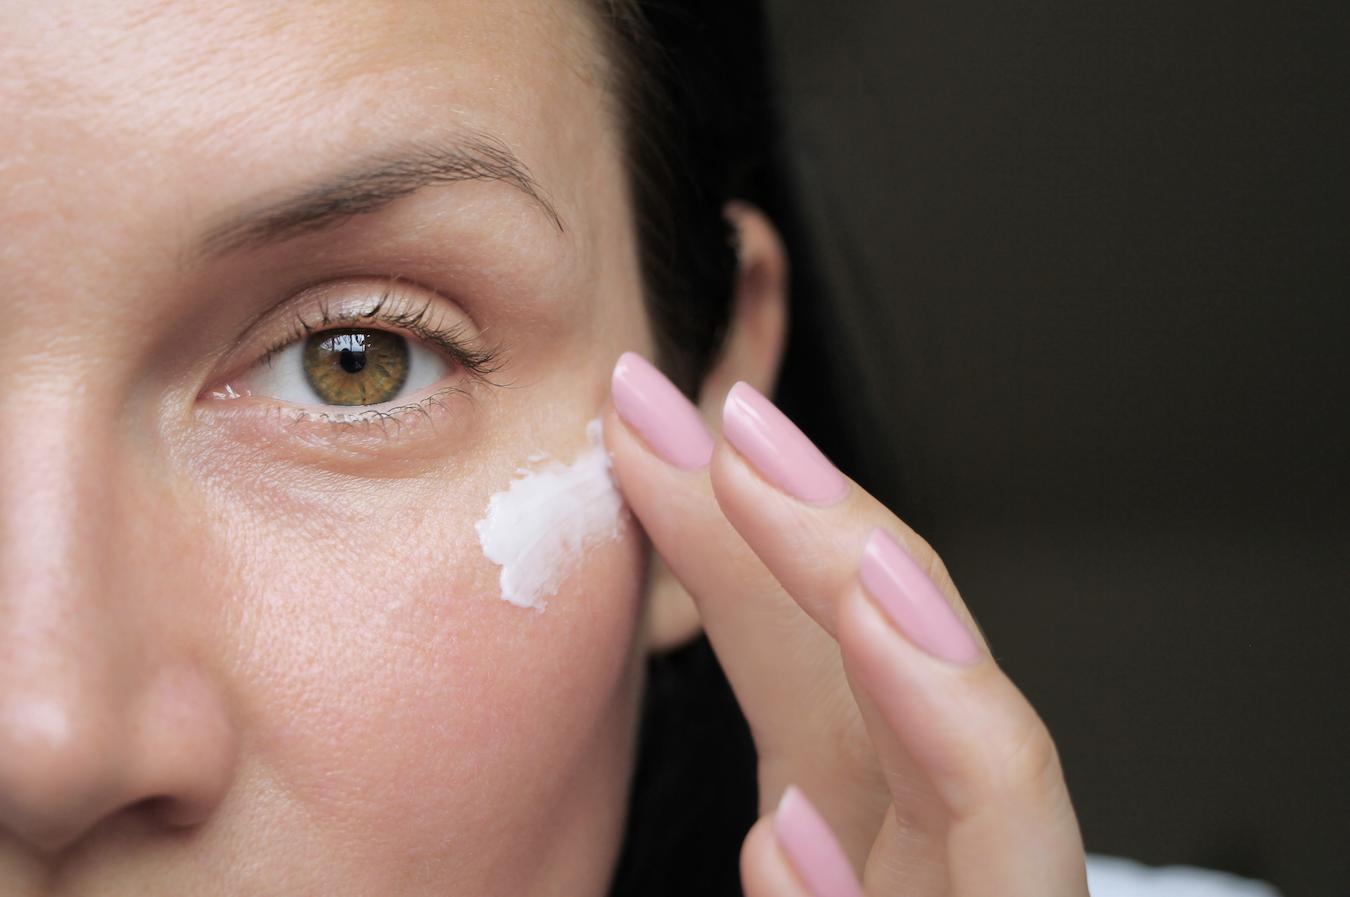 Retinol products are applied topically and perform best as a nighttime routine